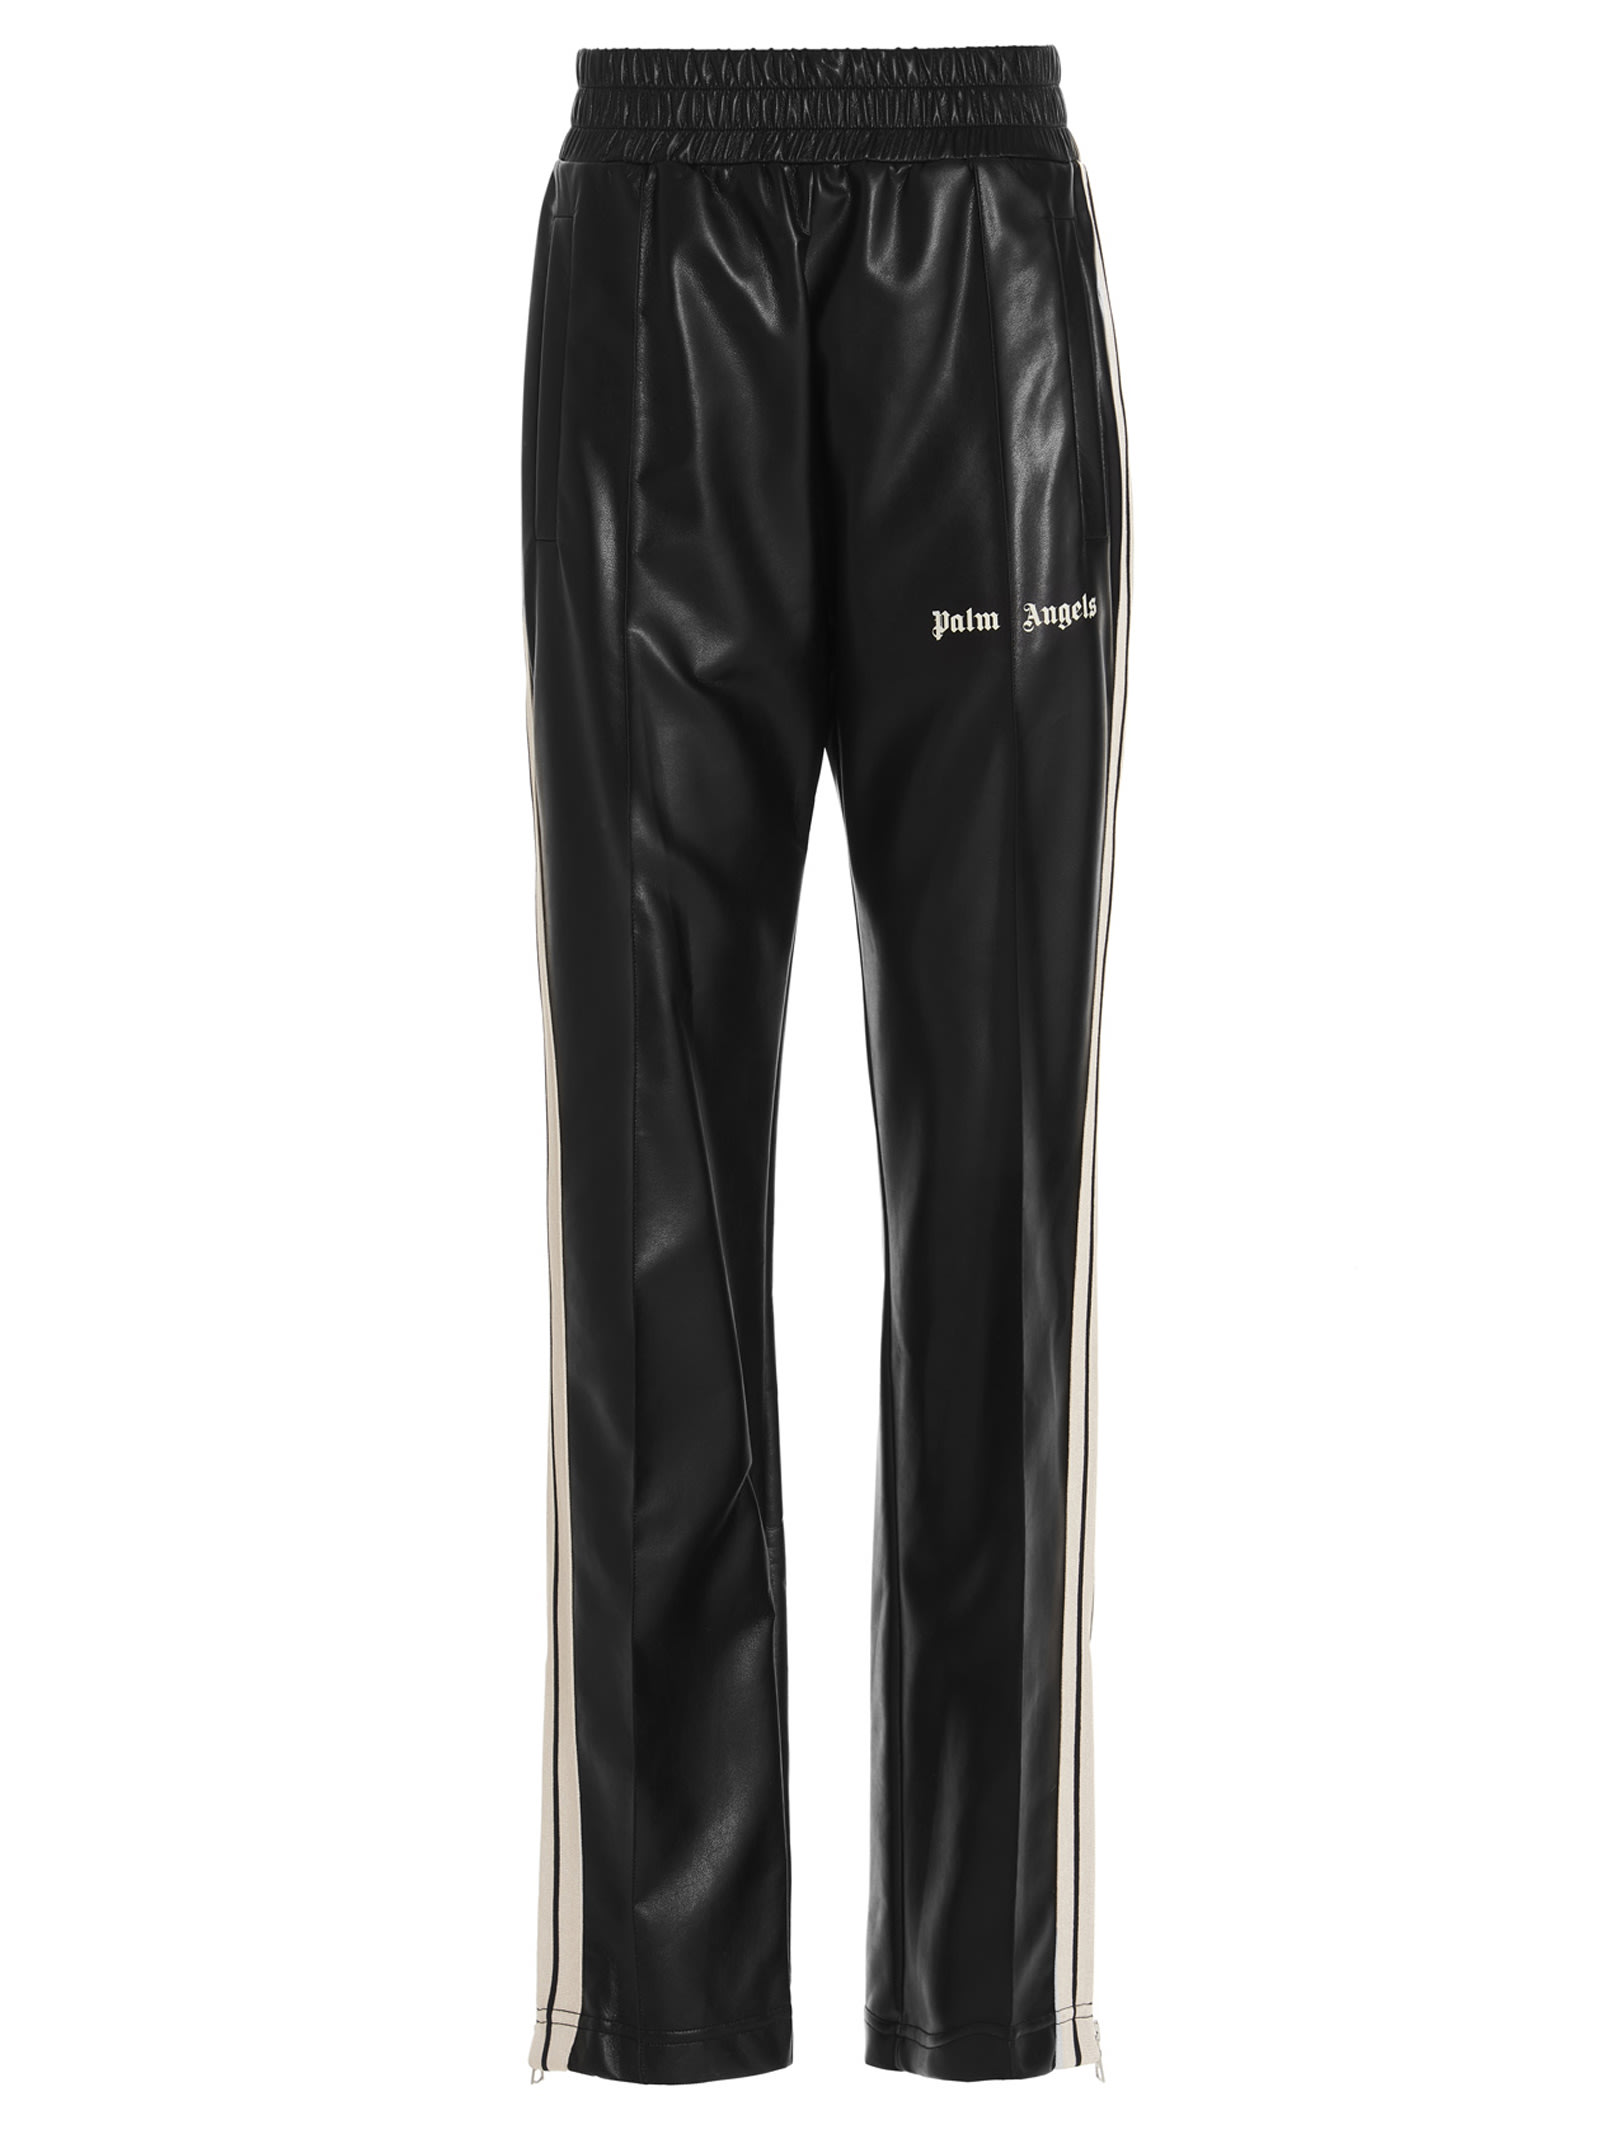 Palm Angels lll Trousers